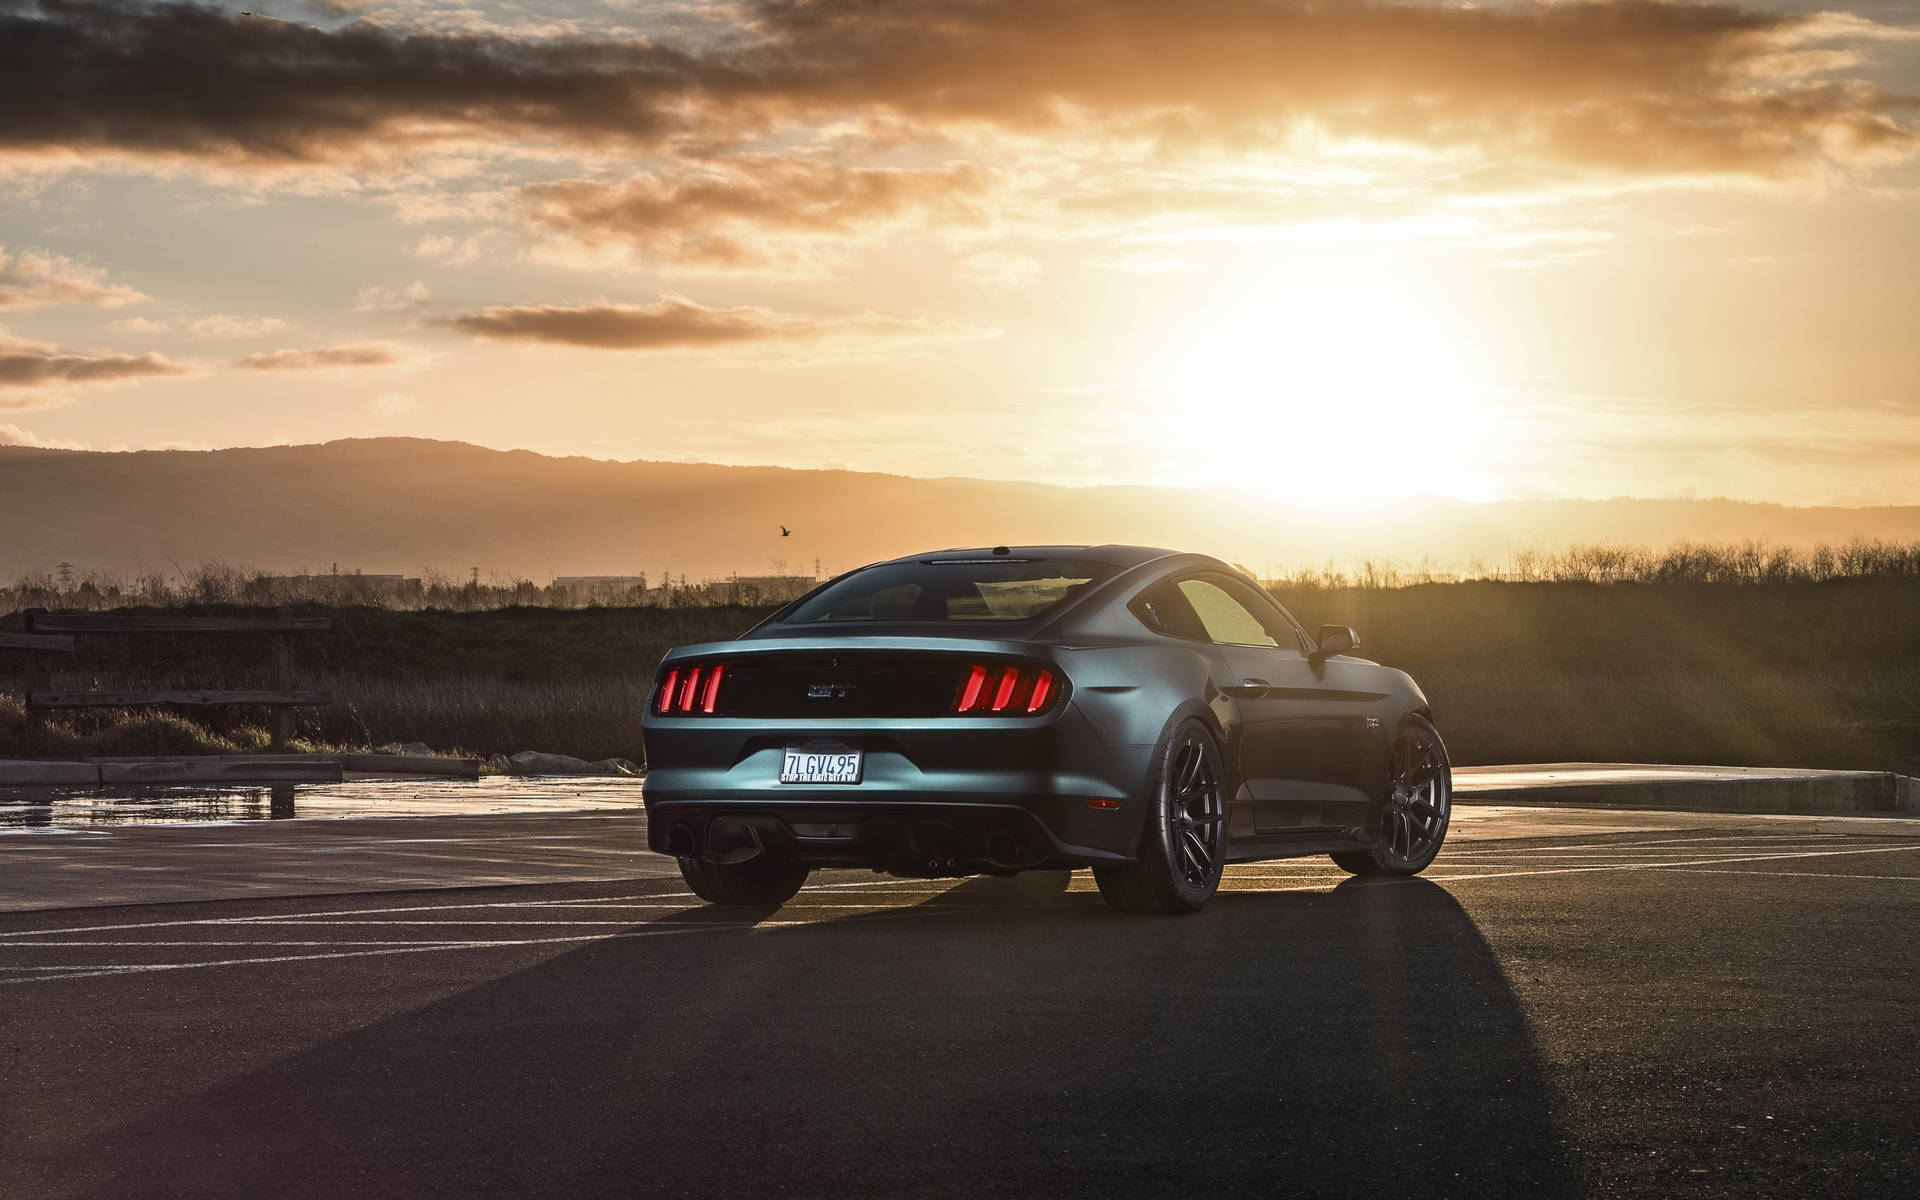 Ford Mustang In Sunset Background